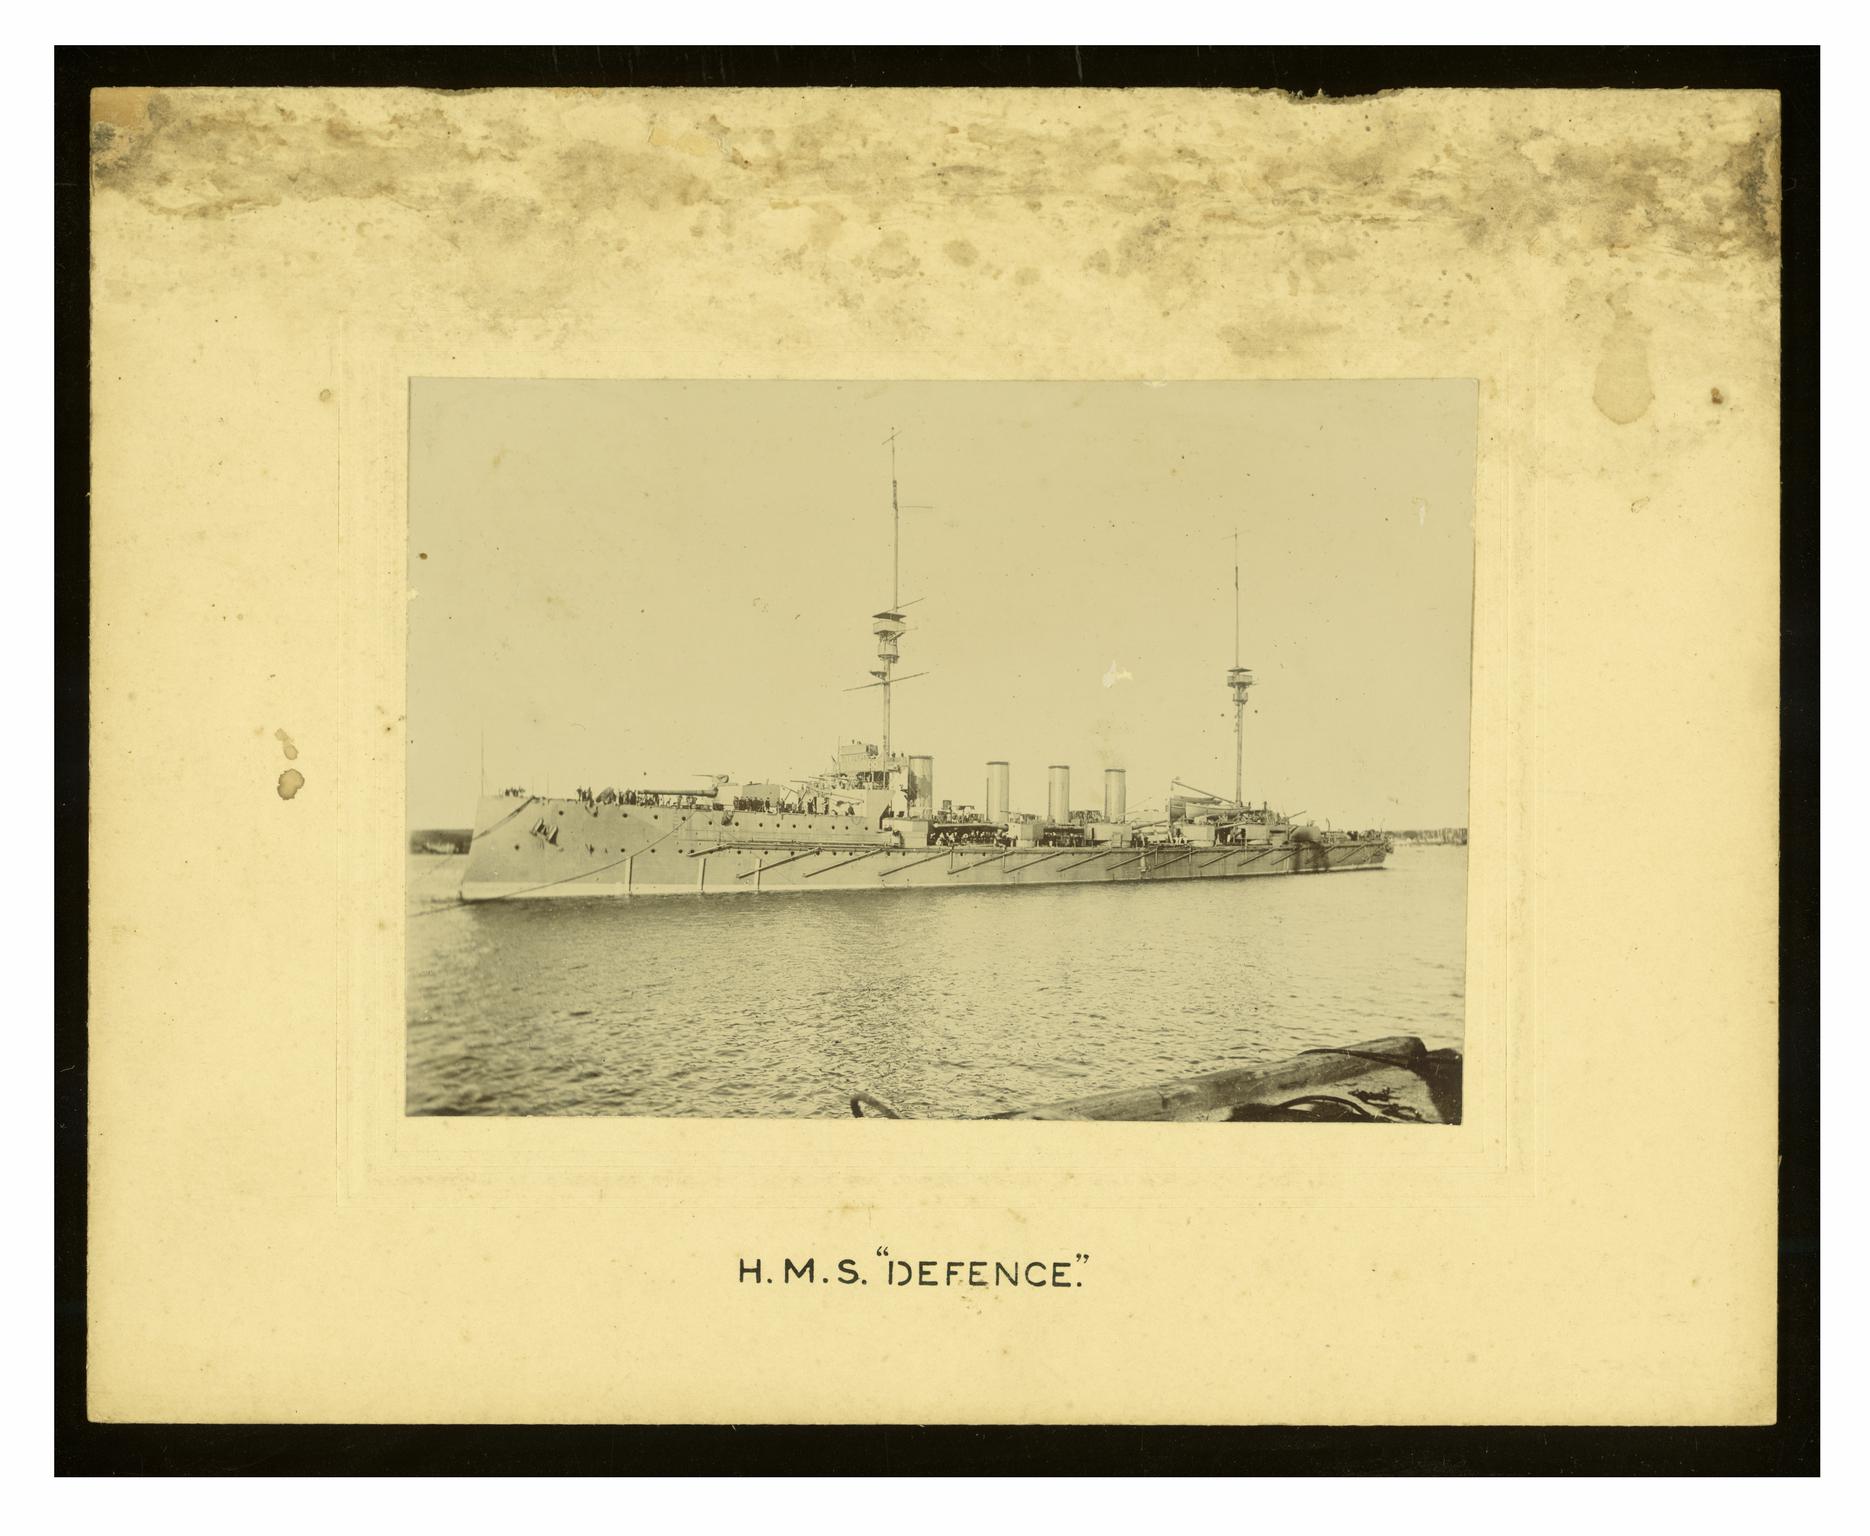 H.M.S. DEFENCE, photograph